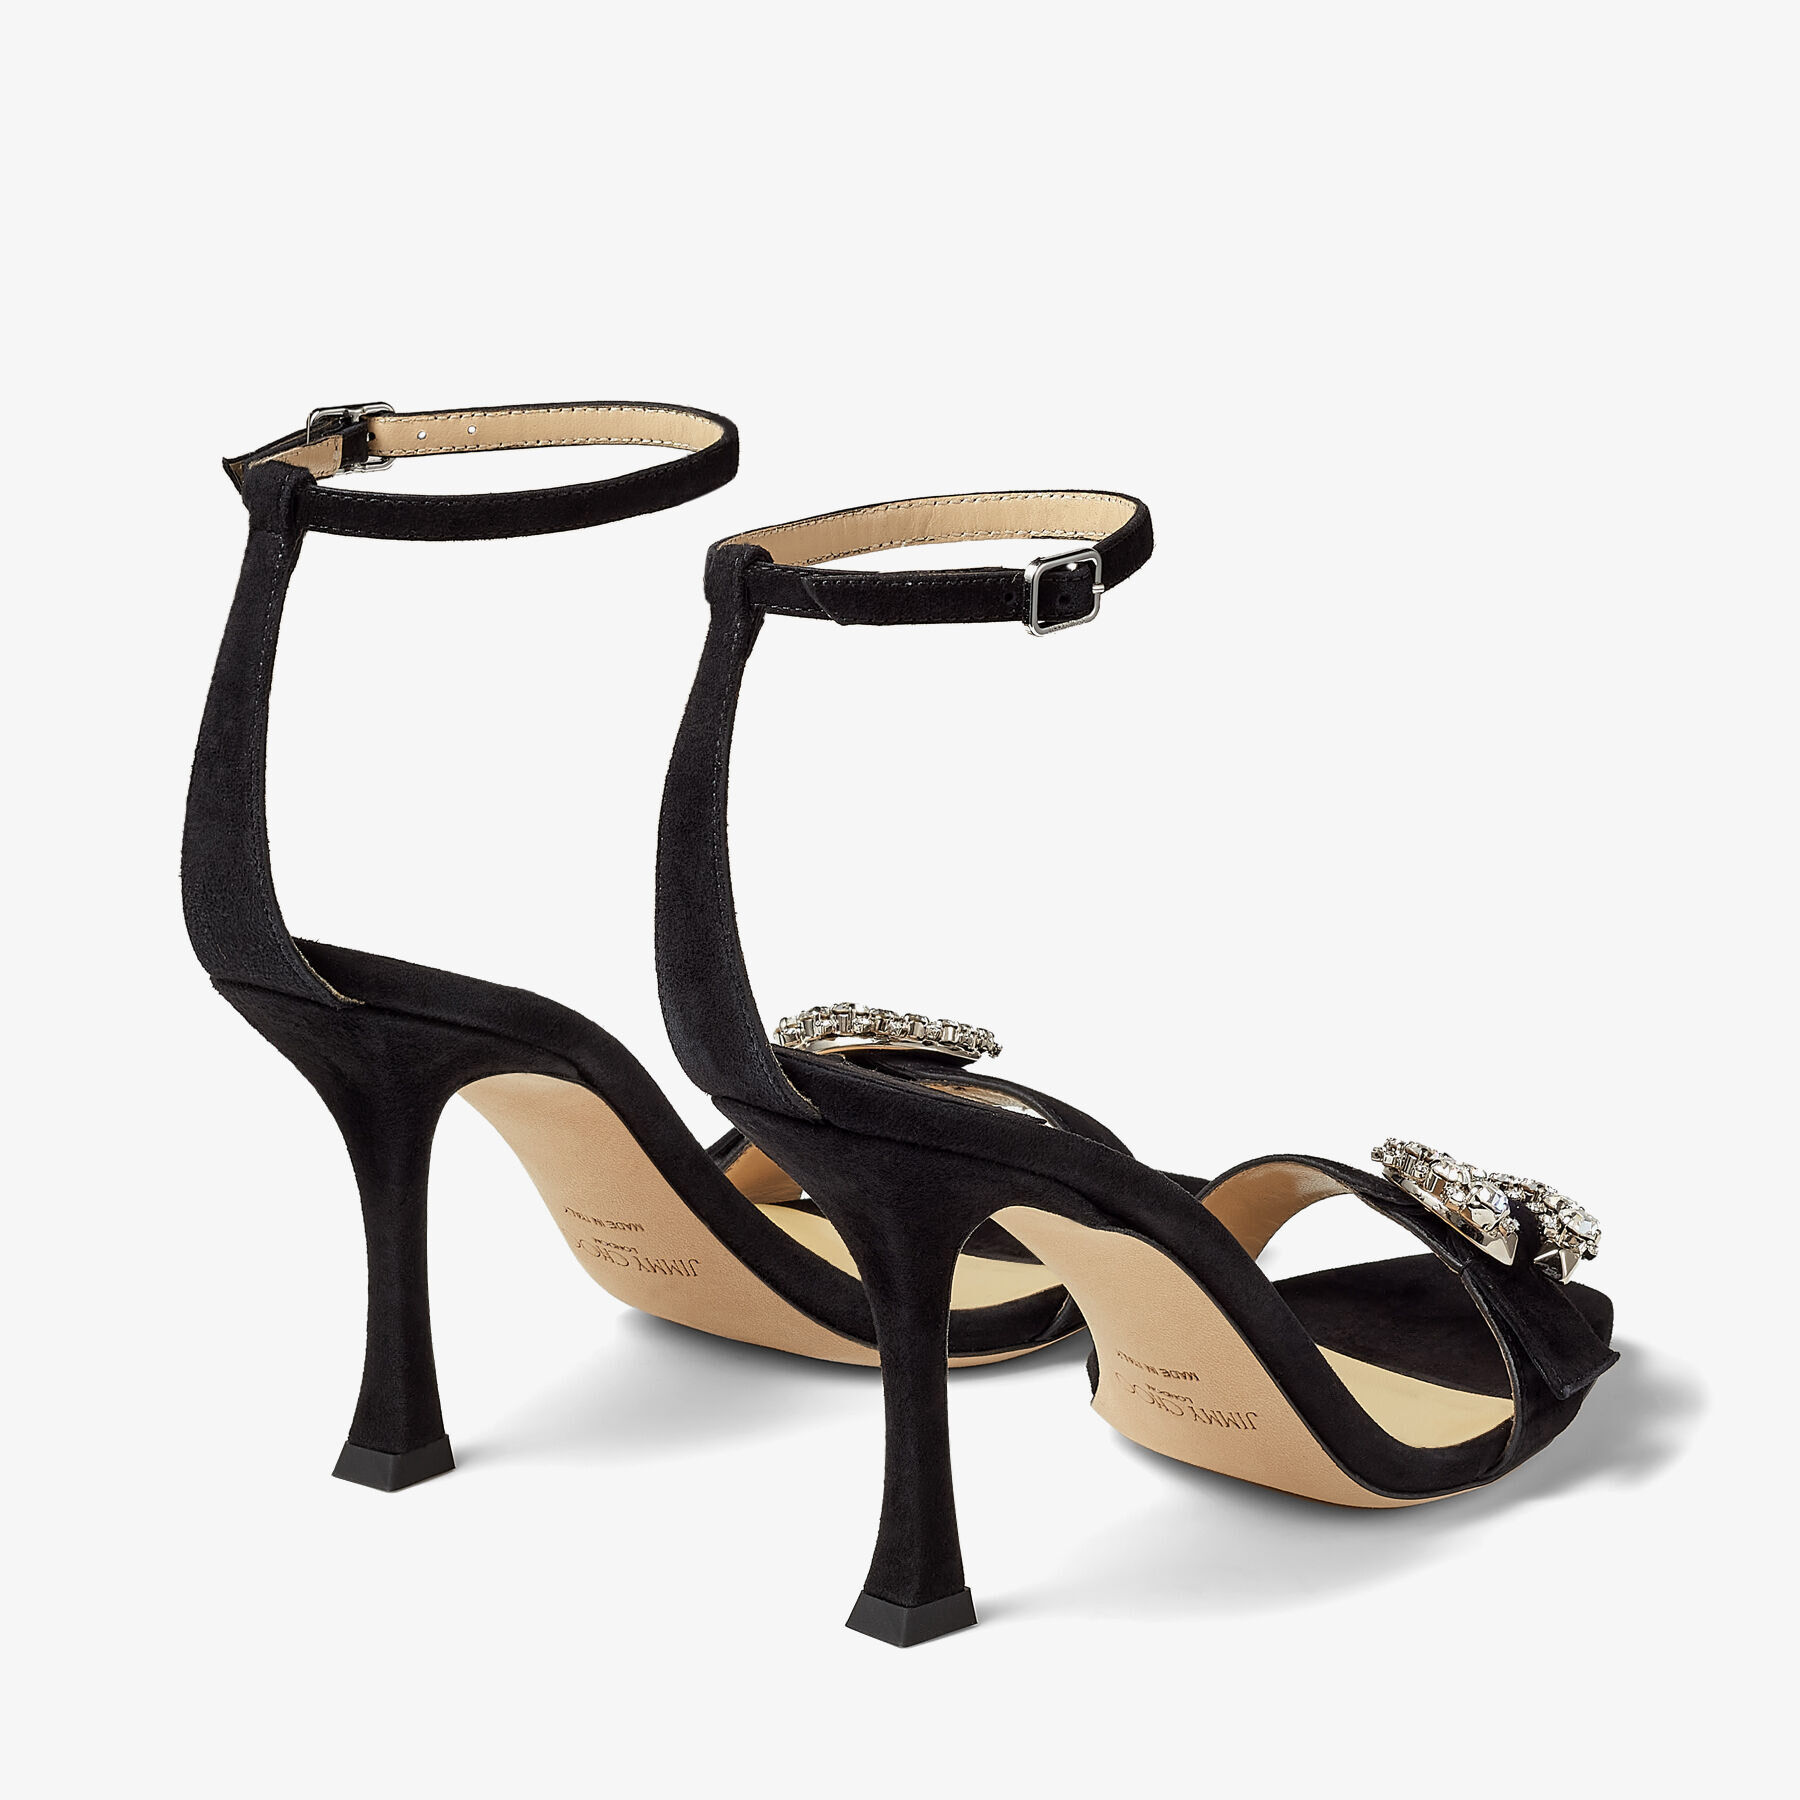 Black Suede Sandals with Crystal Buckle | MARSAI 90 | High Summer 